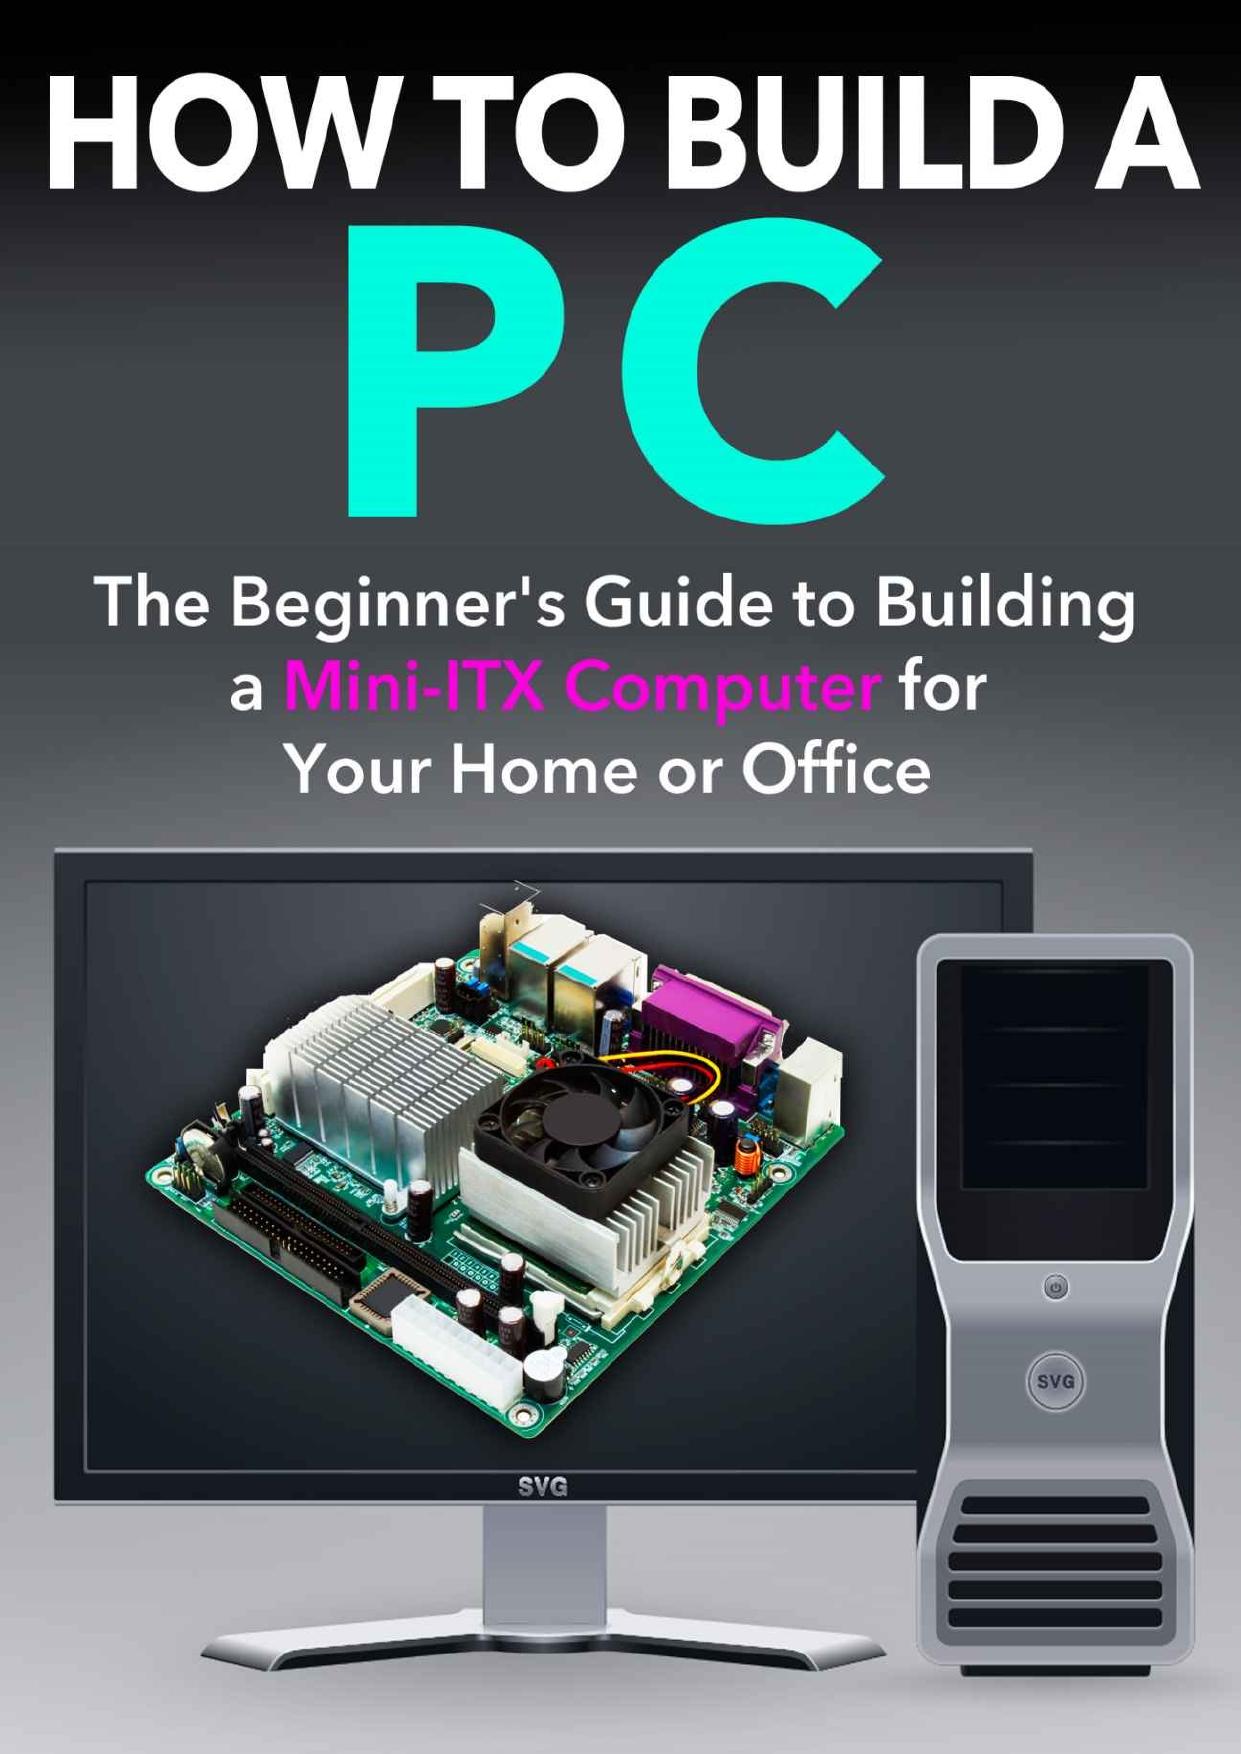 How to Build a PC: The Beginnerâs Guide to Building a Mini ITX Computer for your Home or Office by Dogwood Apps